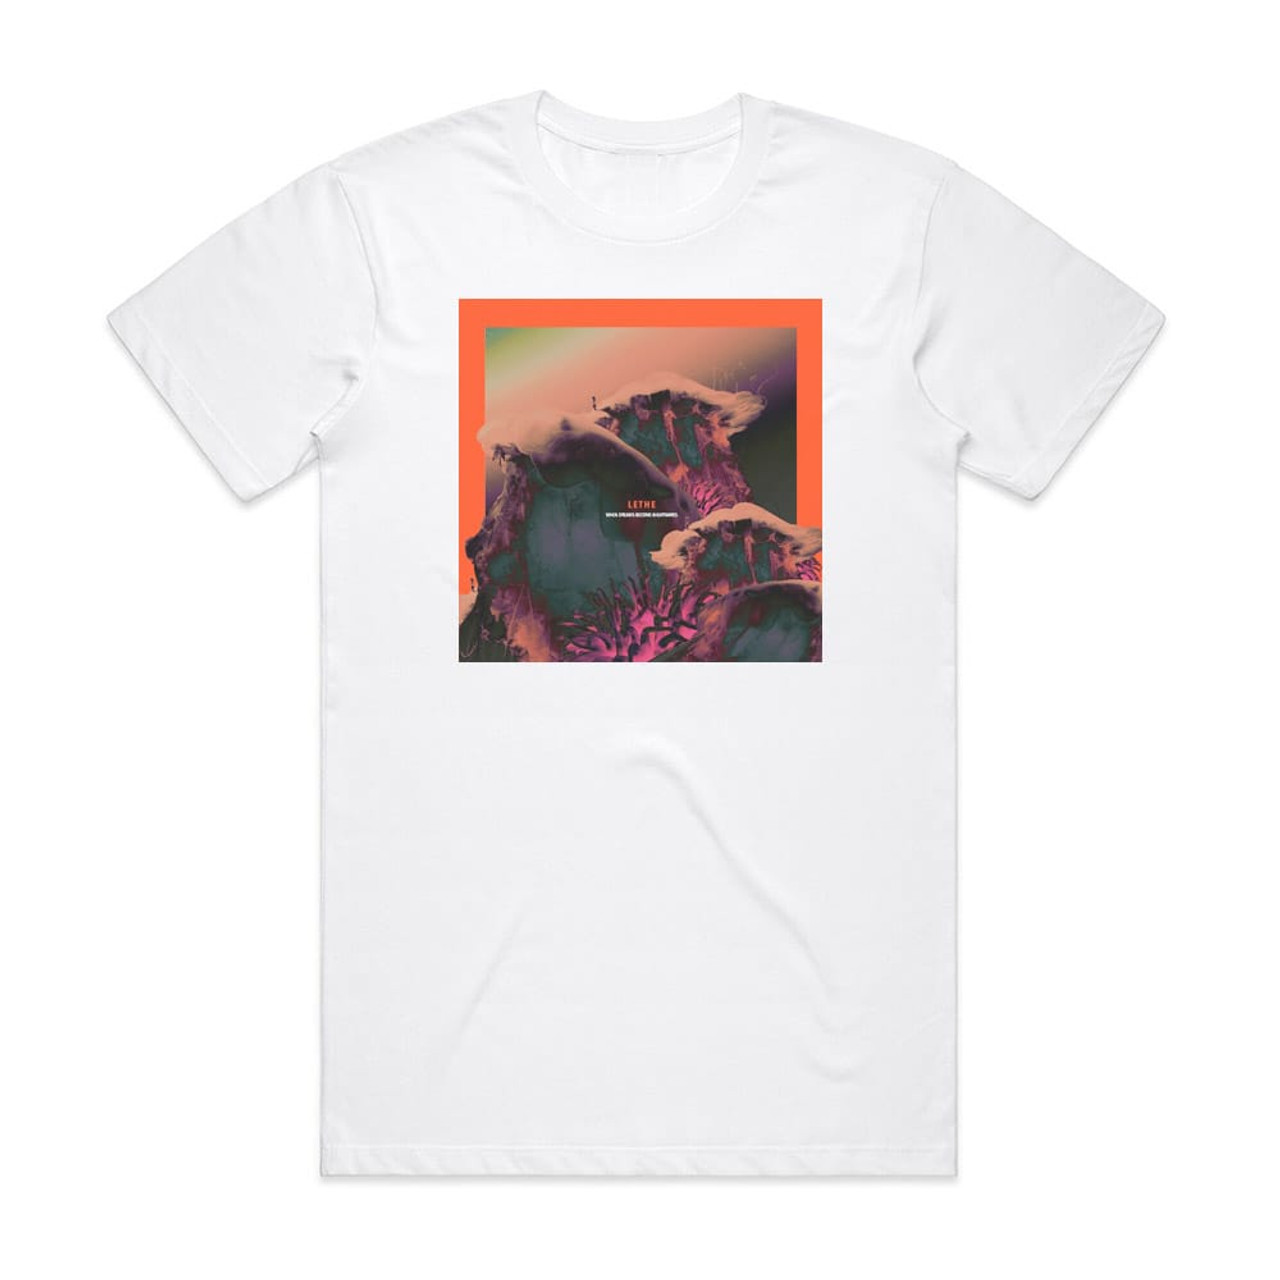 Lethe When Dreams Become Nightmares Album Cover T-Shirt White